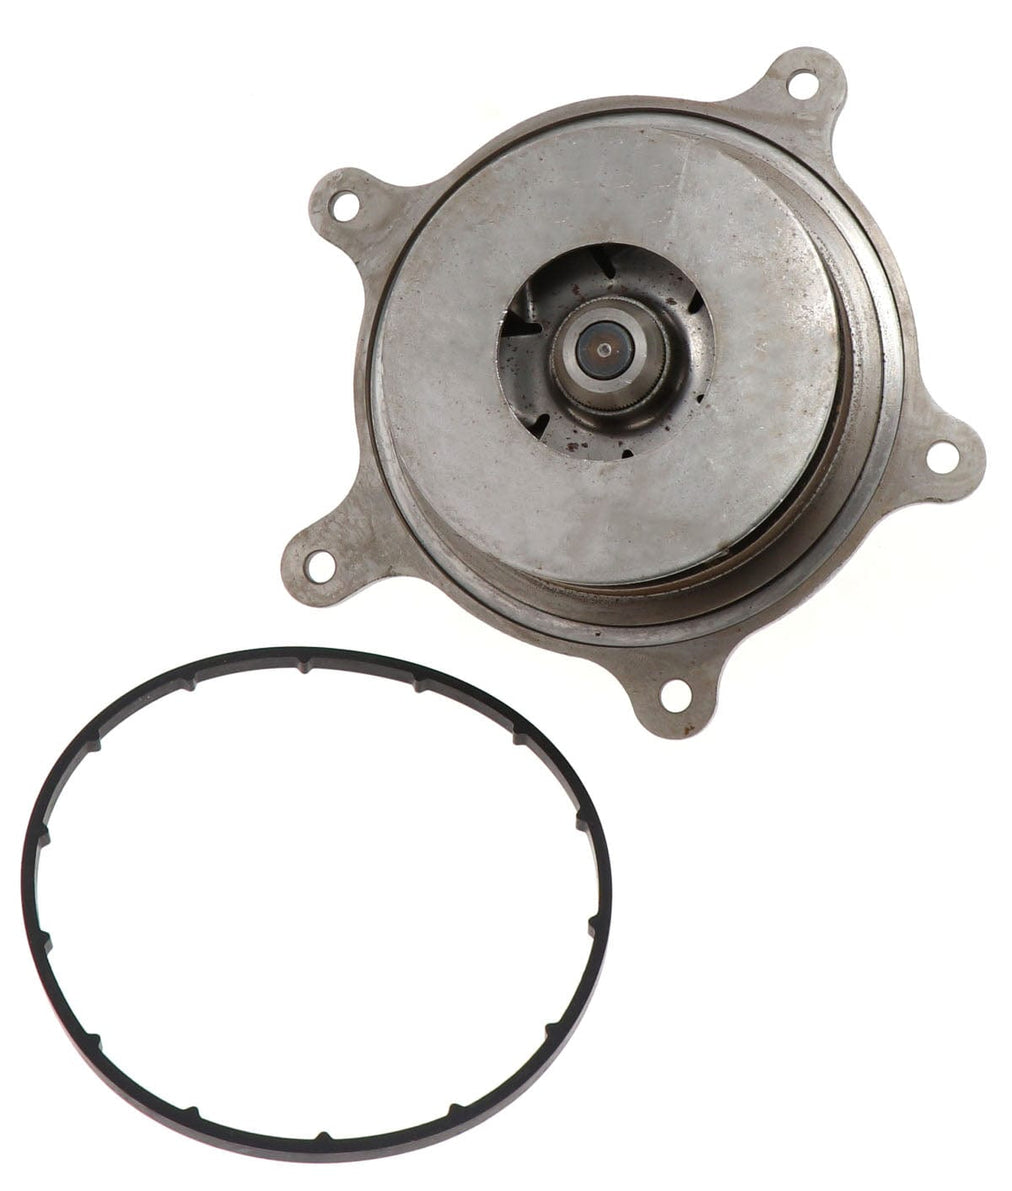 43325HD | Genuine International® Water Pump Assembly DT466, DT466E